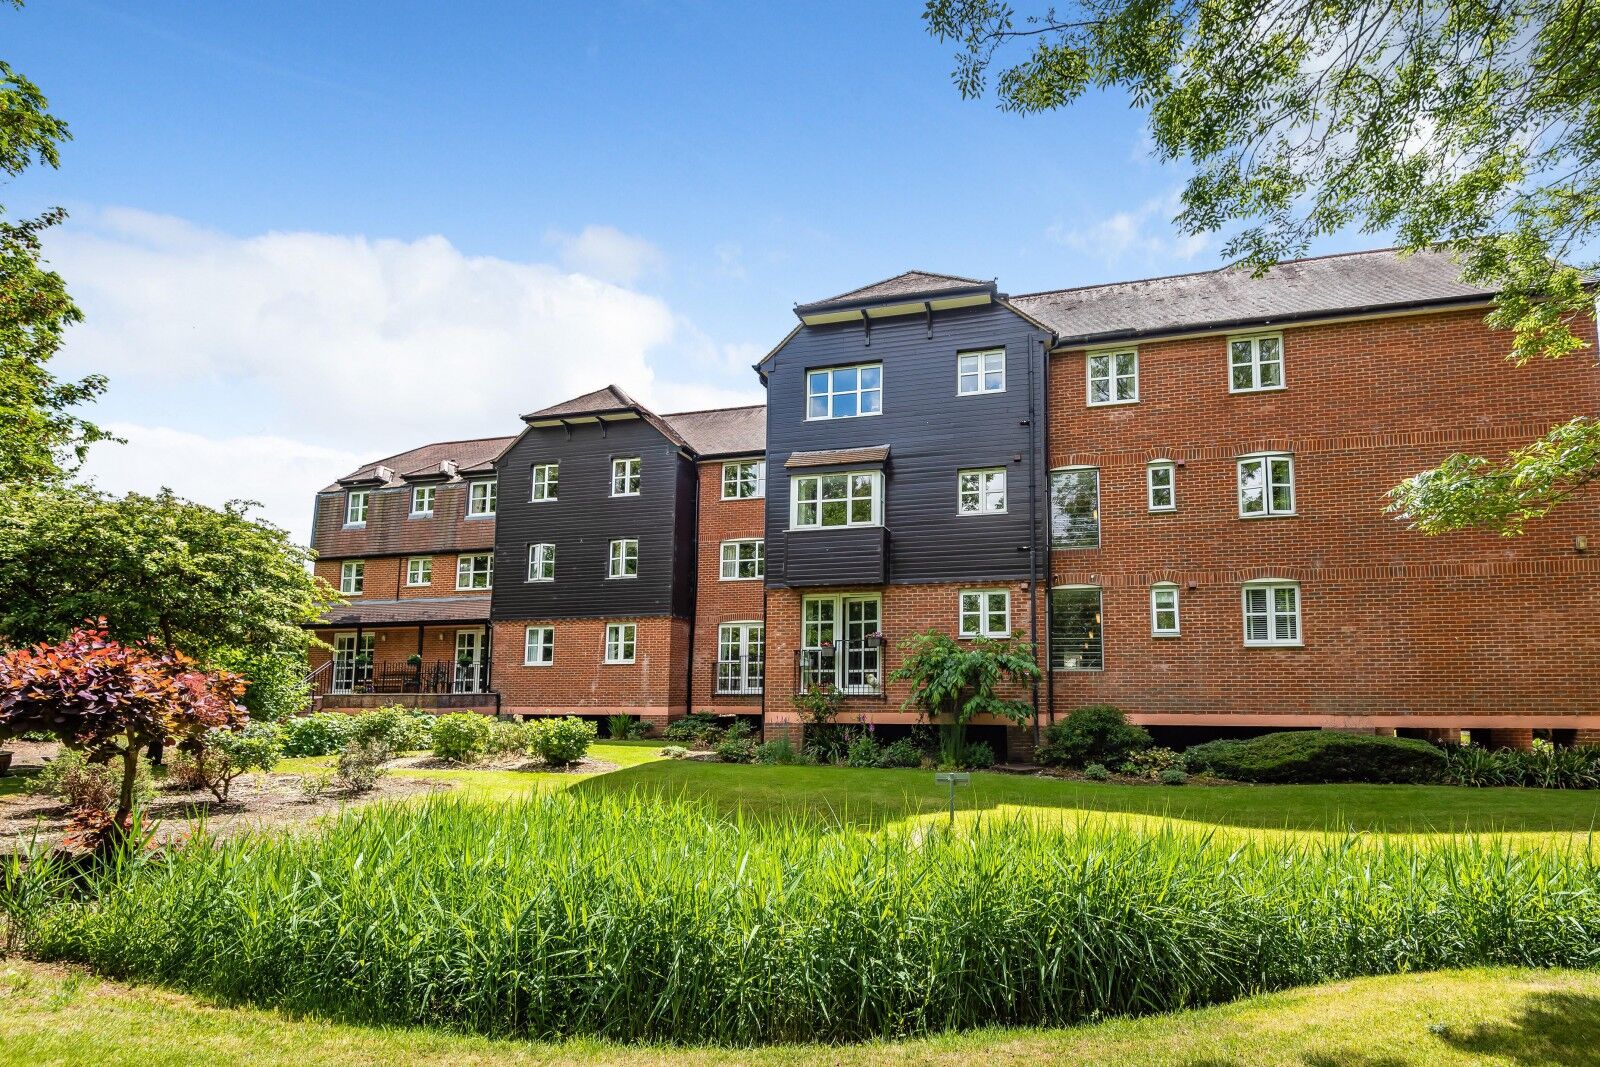 1 bedroom  flat for sale Mill Stream Court, Abingdon, OX14, main image